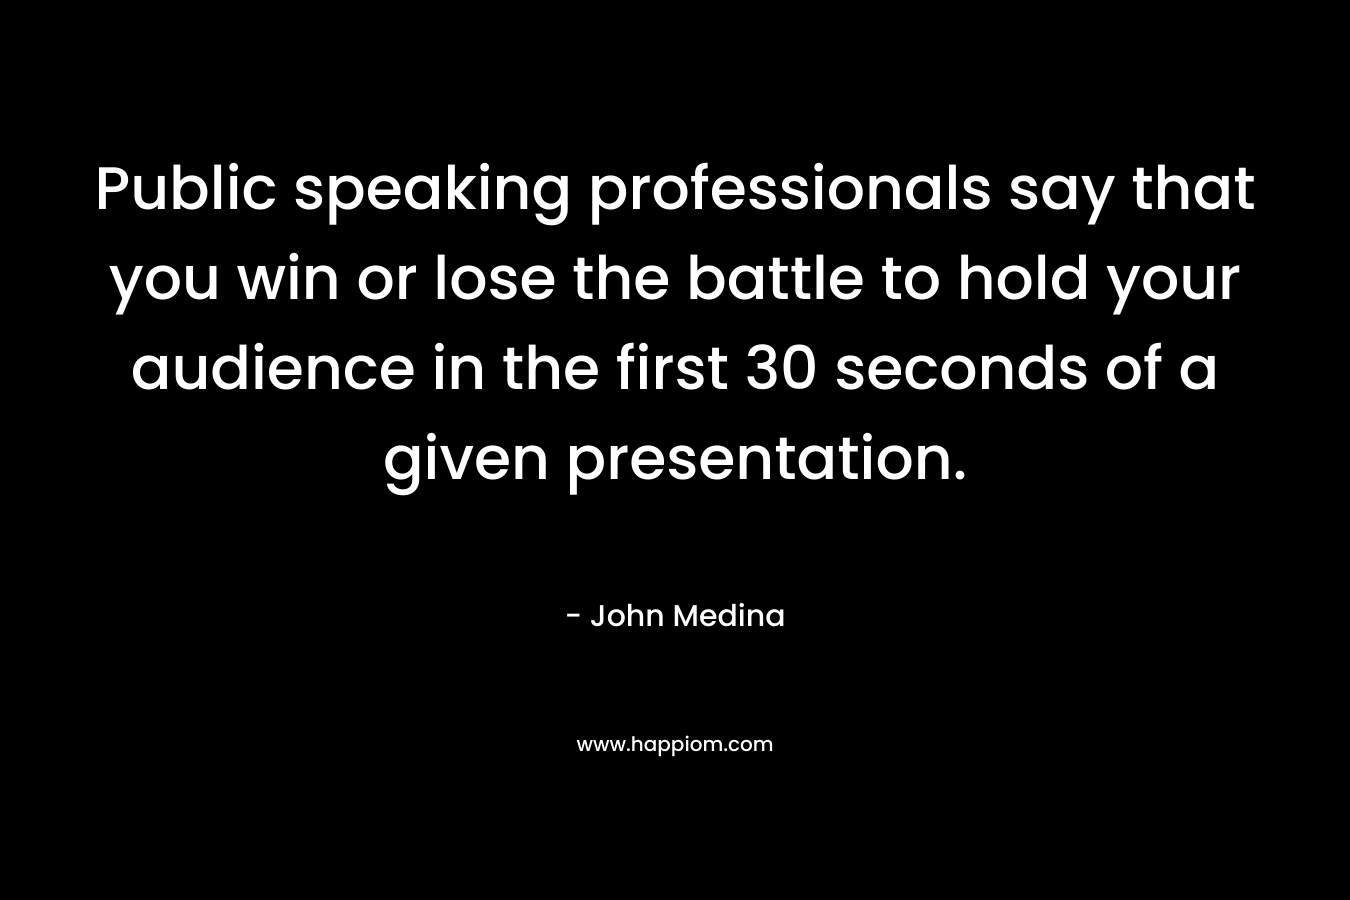 Public speaking professionals say that you win or lose the battle to hold your audience in the first 30 seconds of a given presentation.